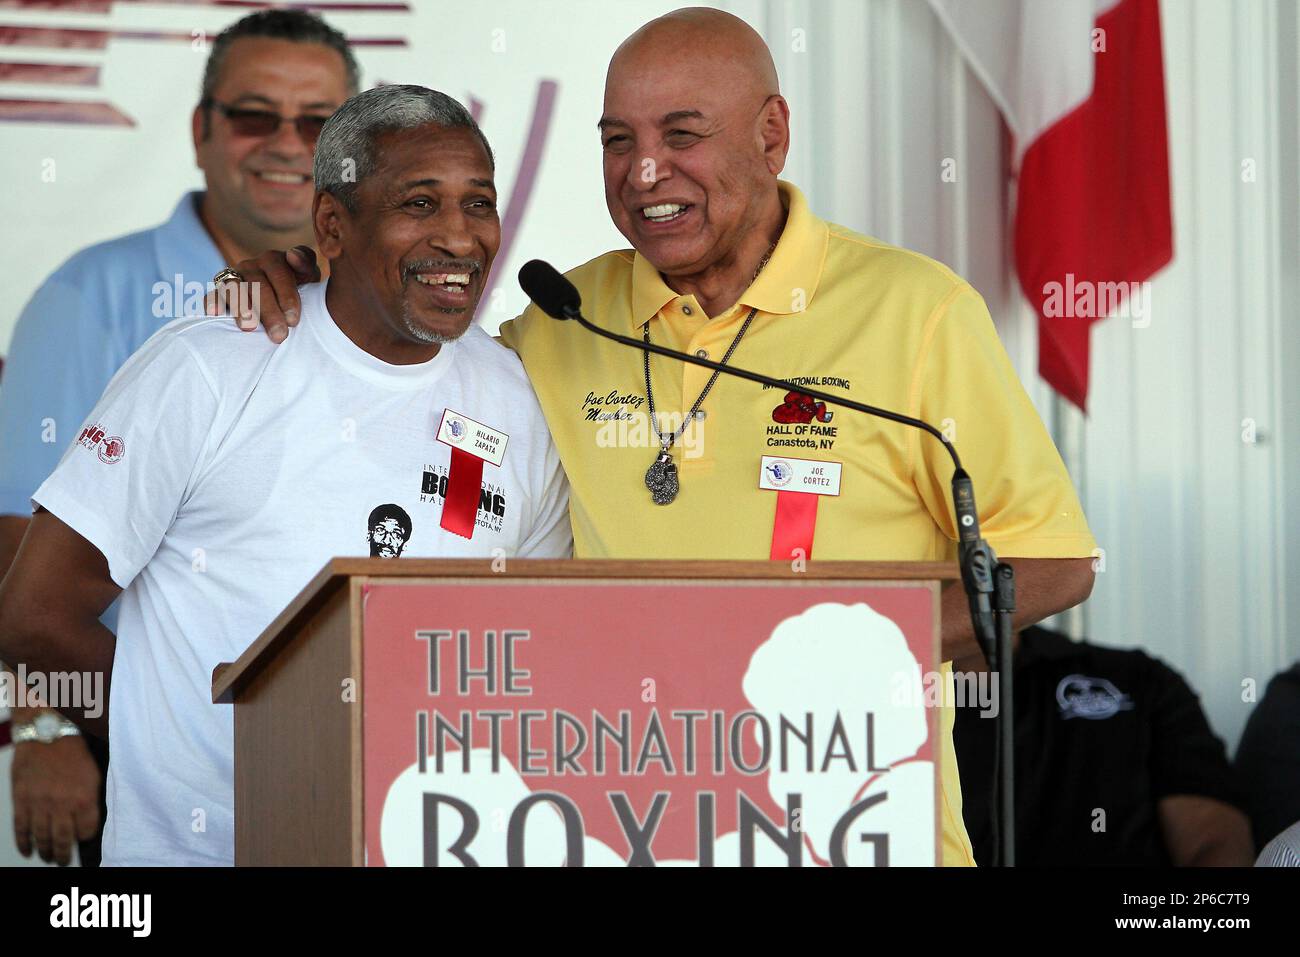 Boxer Hilario Zapata (Left) and Referee Joe Cortez speak to fans during the  23rd Annual induction weekend opening ceremony at the International Boxing  Hall of Fame on Thursday, June 7, 2012 in